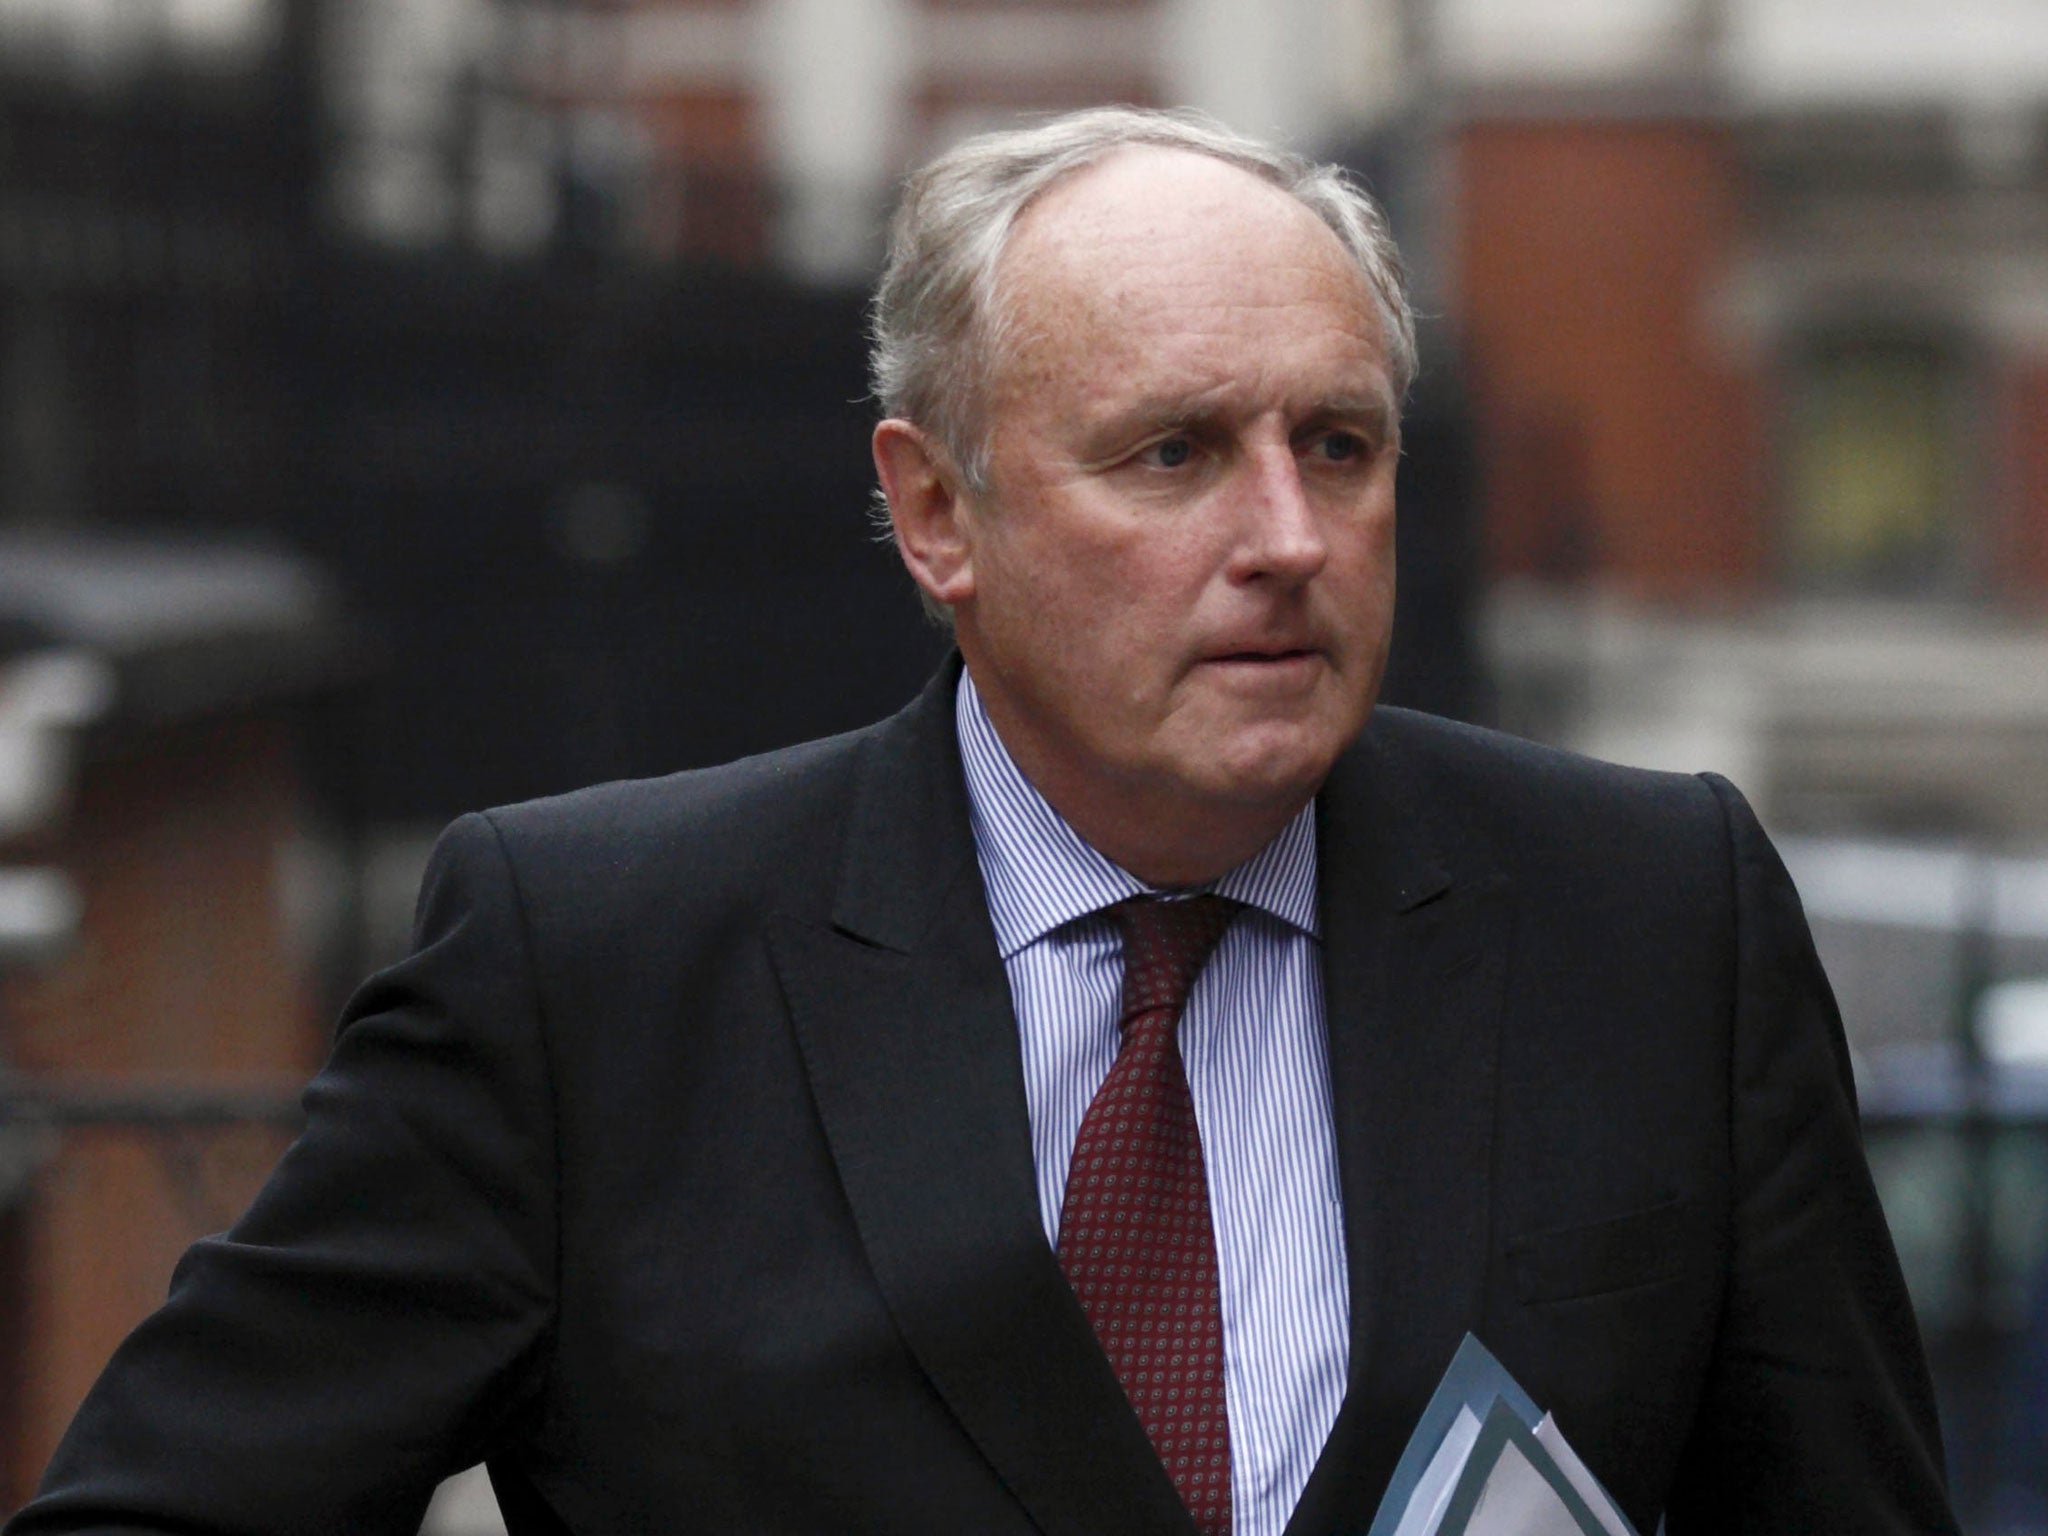 The Daily Mail's editor Paul Dacre